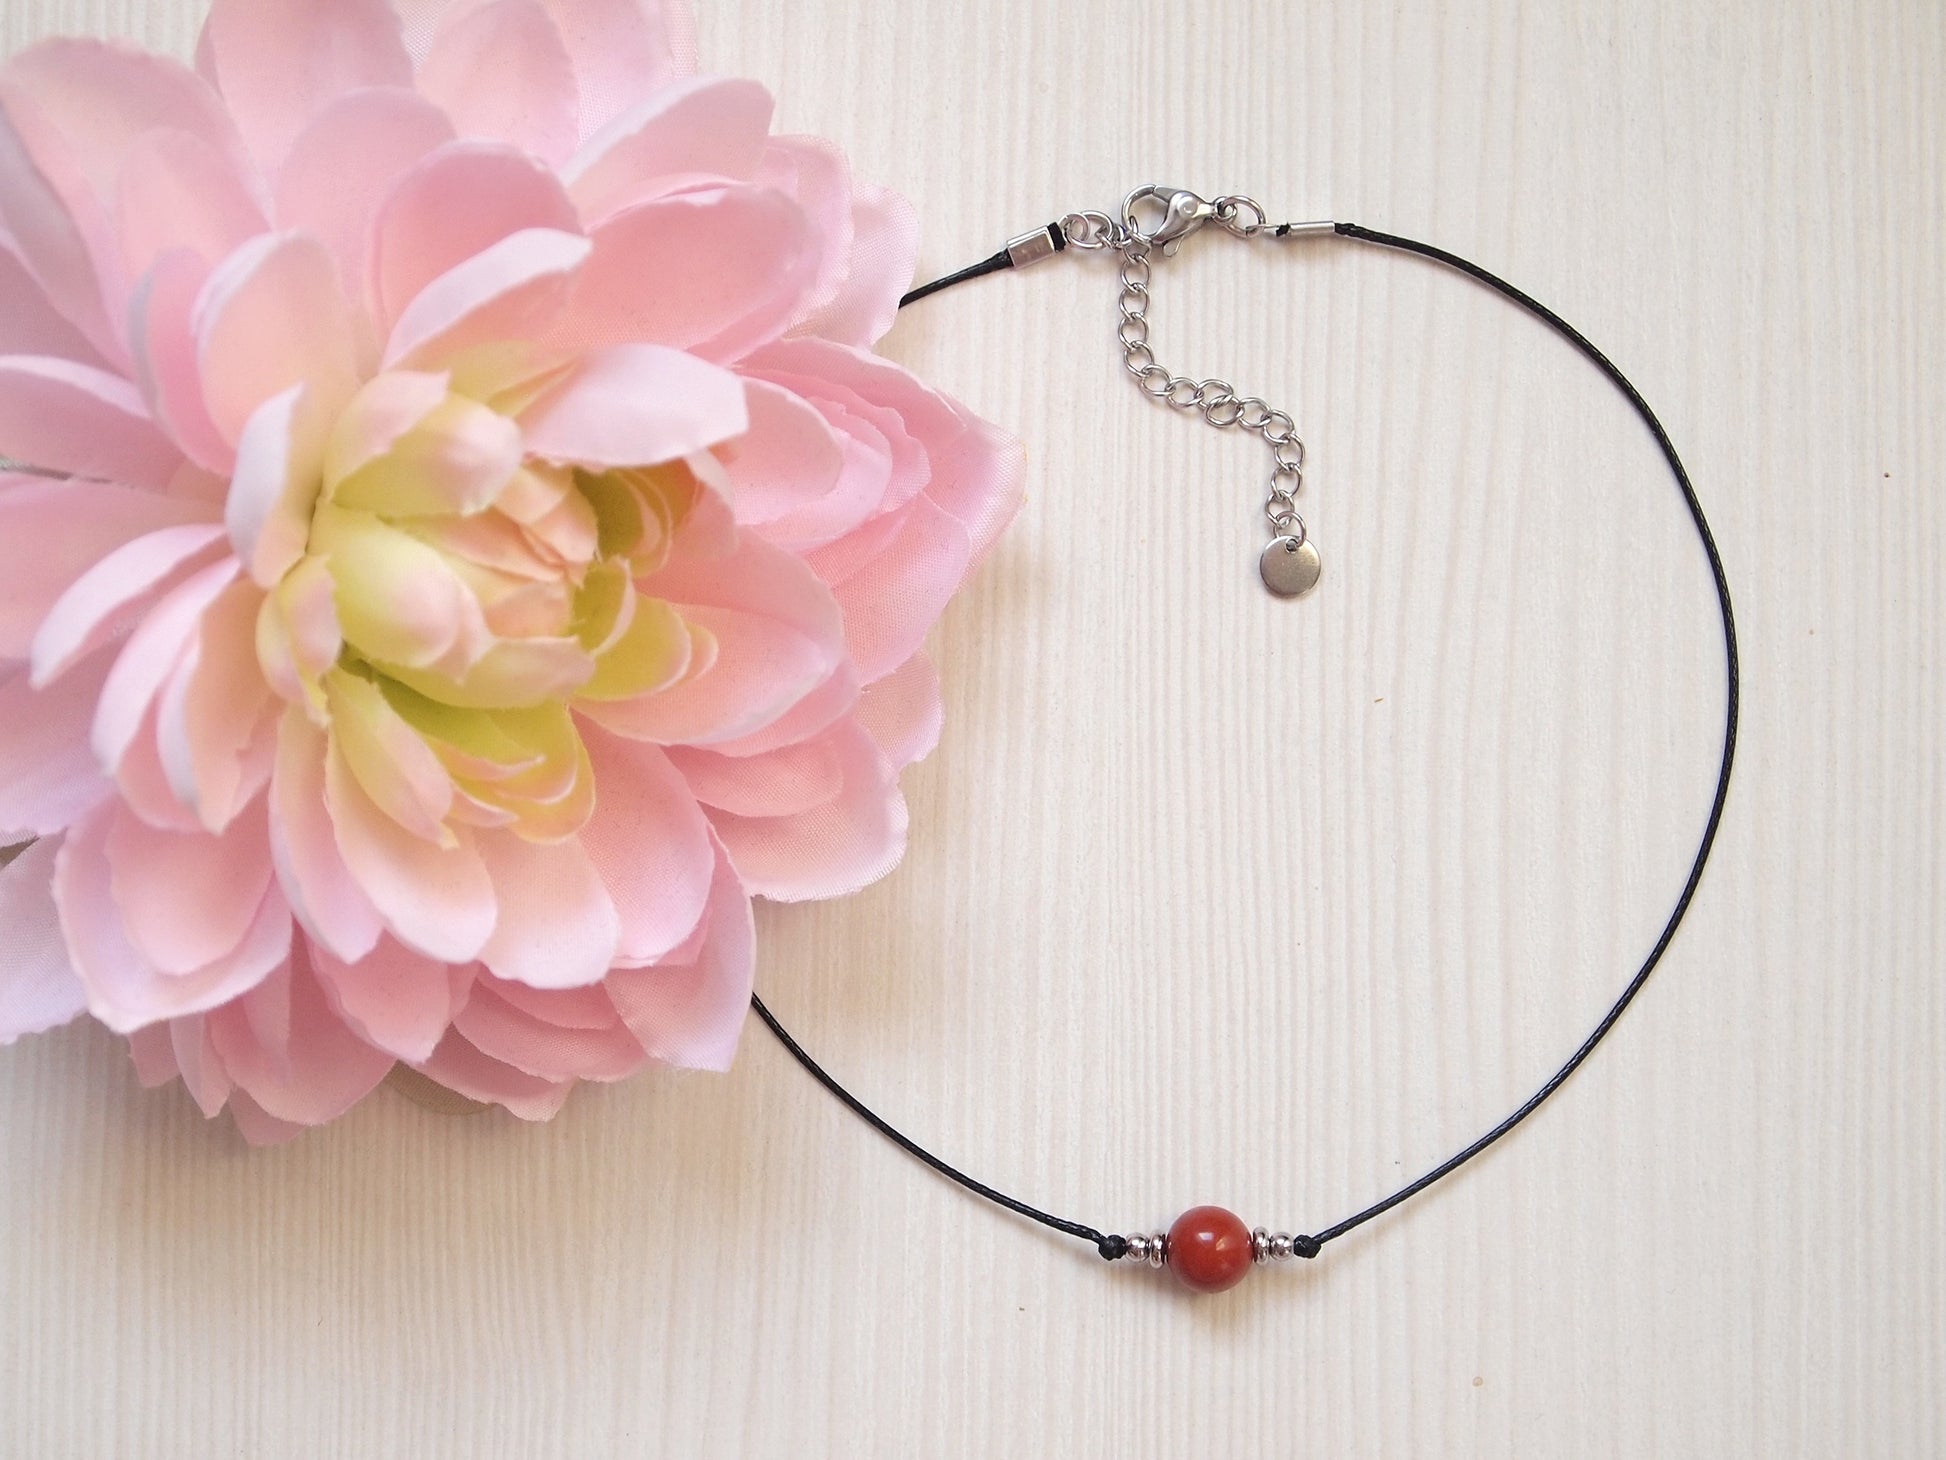 root chakra necklace, endurance necklace